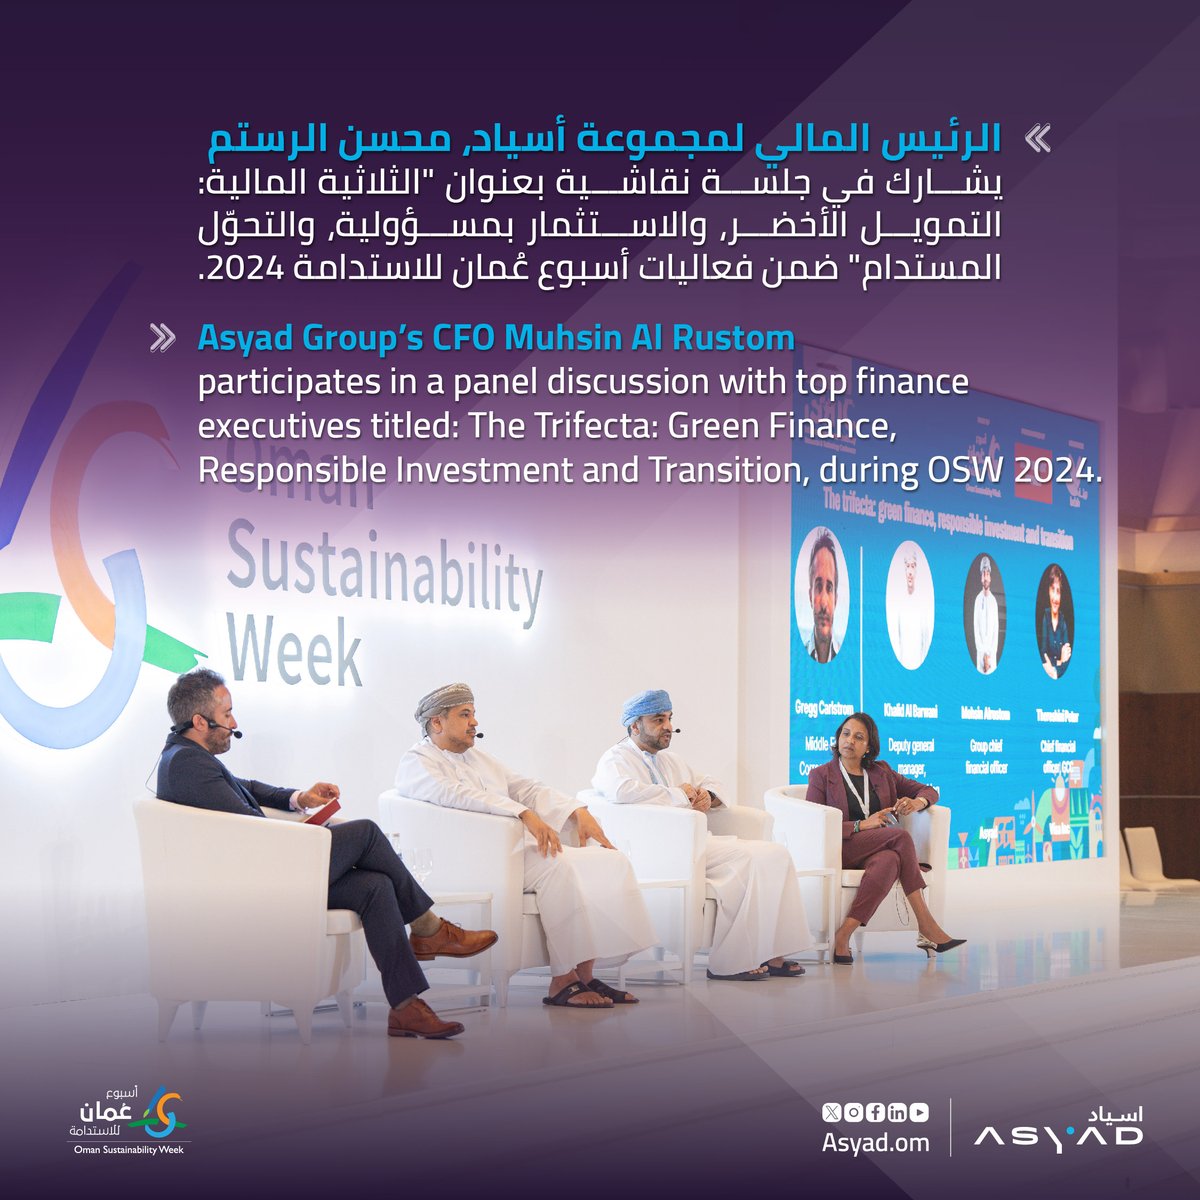 #ASYADGroup sharing insights at #OSW24 In a panel discussion with top finance executives titled The Trifecta: Green Finance, Responsible Investment and Transition, our Chief Financial Officer Muhsin Al Rustom speaks on the global trends in green financing, the preparedness of